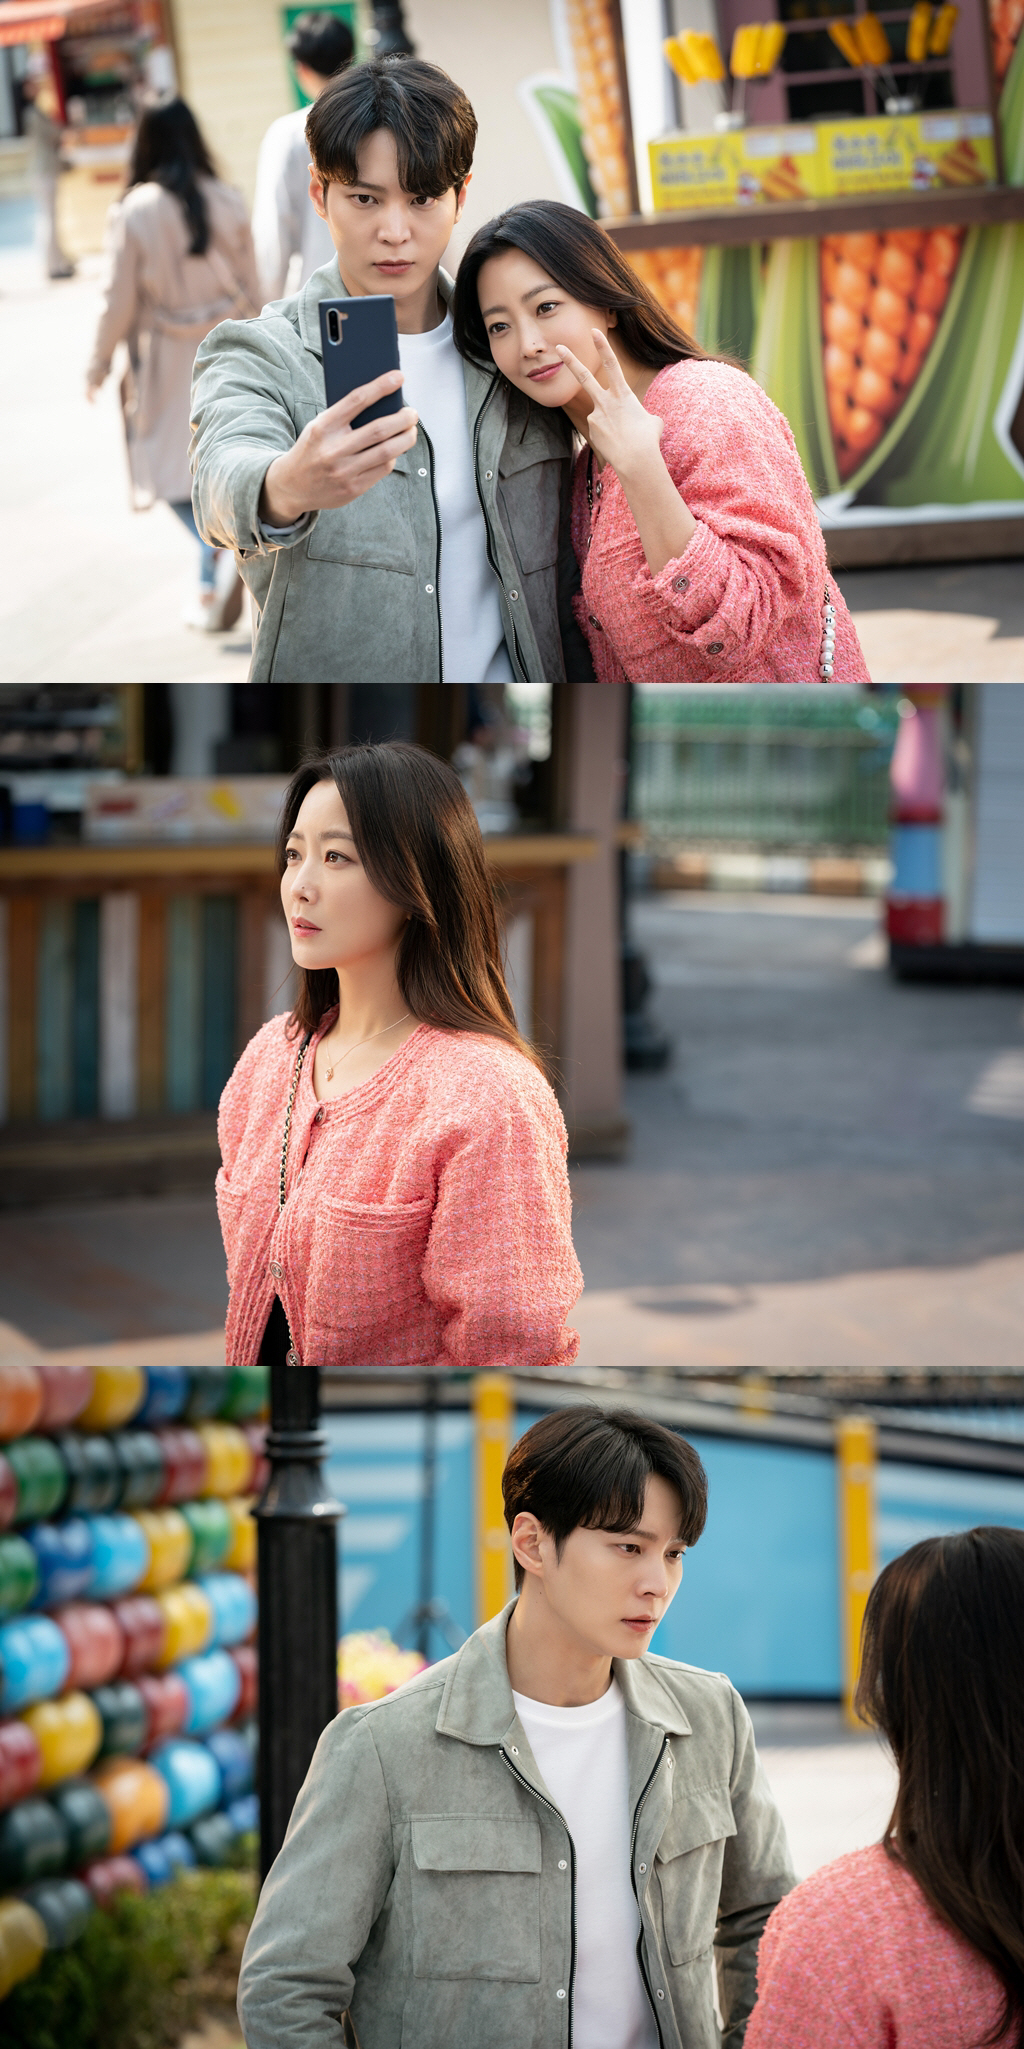 Alice Kim Hee-sun and Joo Won go to the amusement park together, but somehow it doesnt look like a joy.SBS gilt drama Alice (playplayplayed by Kim Gyu-won, Kang Cheol-gyu, Kim Ga-young/directed by Baek Soo-chan/production studio S/investment wave) engulfed A house theater with a swirling development.Yoon Tae-yi (Kim Hee-sun), who was told that Park Jin-gyeom died after a time trip to 2021, returned to 2020 magically.She wants to prevent Park Jin-gum from dying somehow. Park Jin-gum, who does not know this, smiled for the first time in front of Yoon Tae-yi.In the ninth inning, Yoon Tae-yi fell down while leaving the house with Park Jin-gum.Yoon Tae-yis fallen arms were stained with spots, a sign of side effects that had appeared in the bodies of The Passengers.Yoo Min-hyuk is shocked to know that Park Jin-gum is his son. As the relationship and Feeling of the characters in the drama are complicated, the curiosity of viewers is soaring.On September 26, Alice production team released Yoon Tae-yi and Park Jin-gum, who spend time alone in the amusement park ahead of the 10th broadcast.The two people in the photo seem to be enjoying the amusement park, such as taking pictures on their cell phones together like ordinary people.But the two people who do not seem happy stimulate curiosity. Yoon Tae-yi is looking at Park Jin-gum with a sad look.Park Jin-gum is also quite different from the feeling of the ninth inning when he laughed for the first time in his life in front of Yoon Tae-yi, staring at Yoon Tae-yi with a serious expression as if he had something to ask.Why did the two people become so serious in the happy place amusement park for all those who come?In this regard, the production team of Alice said, In the 10th episode broadcast today (26th), Park Jin-gums desire to prevent the death of Park Jin-gum, and Park Jin-gums willingness to protect Yoon Tae-The two peoples minds will be clearly evident in the amusement park scene. Its as important as that.Kim Hee-sun and Joo Won both actors have a delicate and deep acting and expressive power that captures the situation and mind of the two characters. Can Yoon Tae-yi prevent Park Jin-kyums death? Can Park Jin-kyum protect Yoon from the raids of The Passengers?The story of the two main characters, which will become more powerful in the thundering development, can be seen at the 10th SBS drama Alice which is broadcasted at 10 pm tonight on Saturday, September 26th.It is also served on wave (with a replay) on the air as well as on the VOD.Photo Offering = SBS Gold Earth Drama Alice